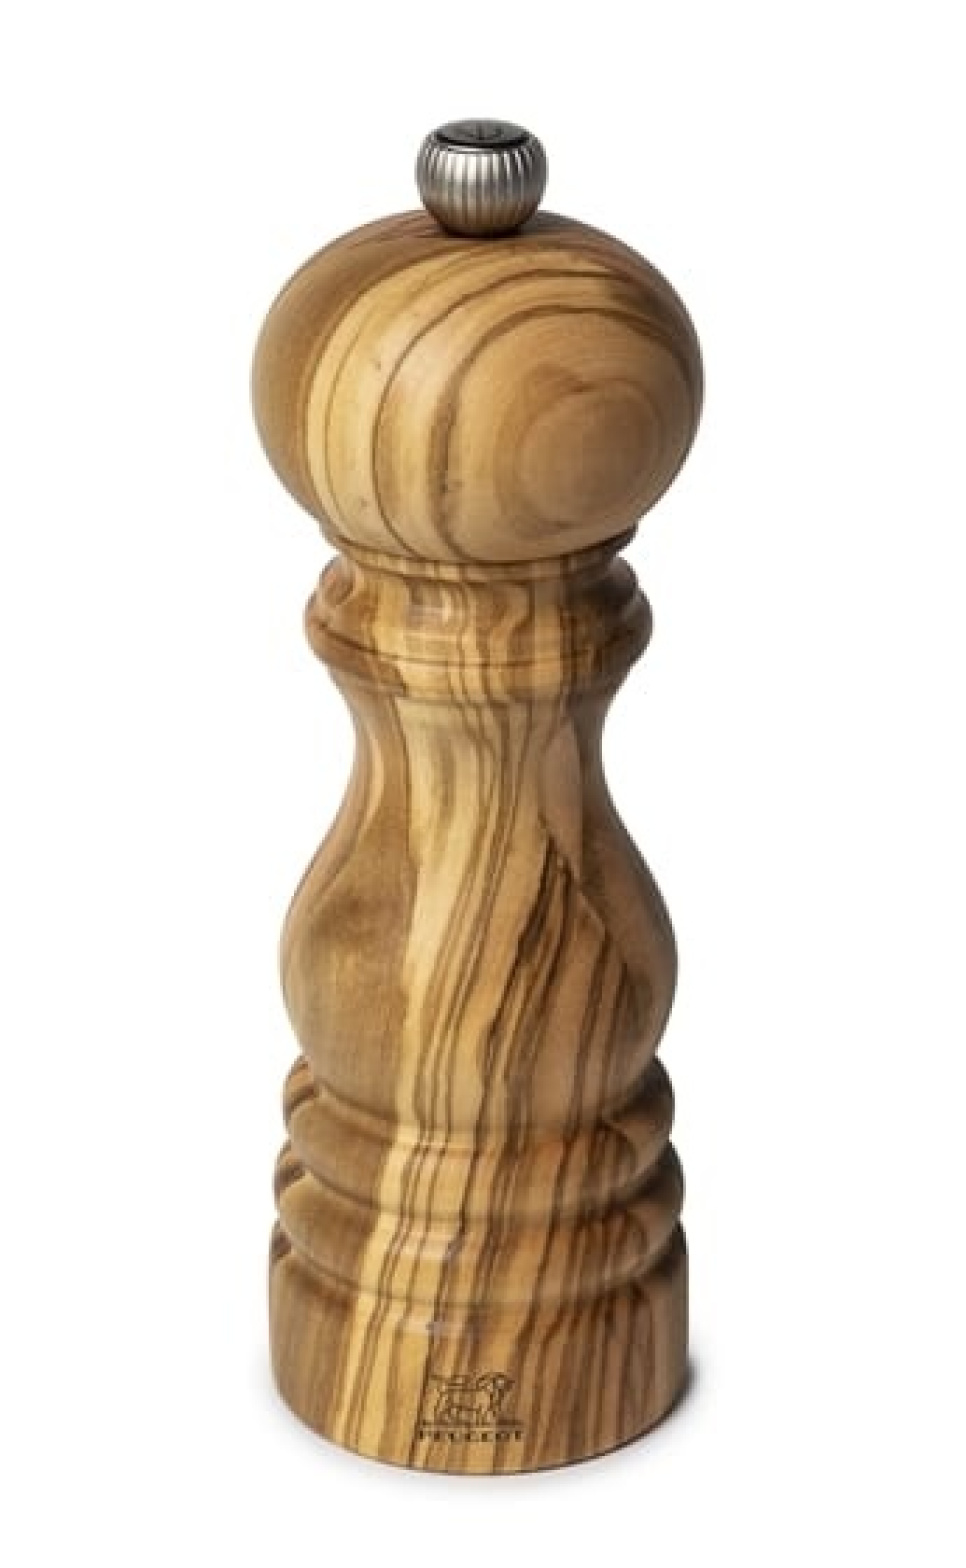 Pepper mill in olive wood, 18 cm, Paris - Peugeot in the group Cooking / Kitchen utensils / Salt & pepper mills at KitchenLab (1090-23630)